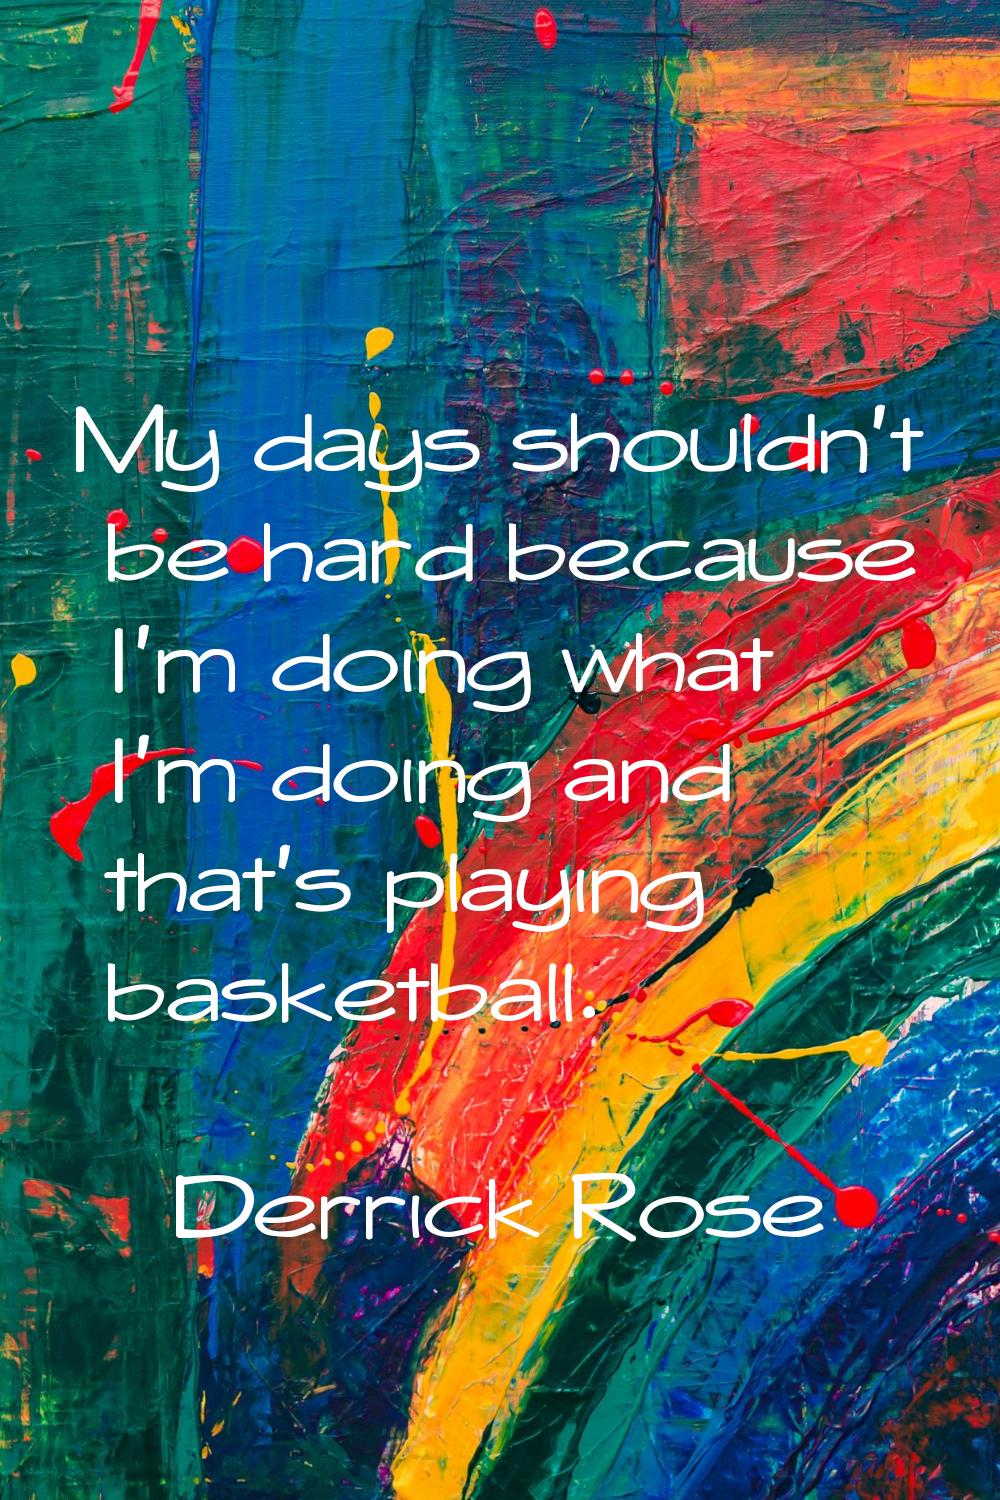 My days shouldn't be hard because I'm doing what I'm doing and that's playing basketball.